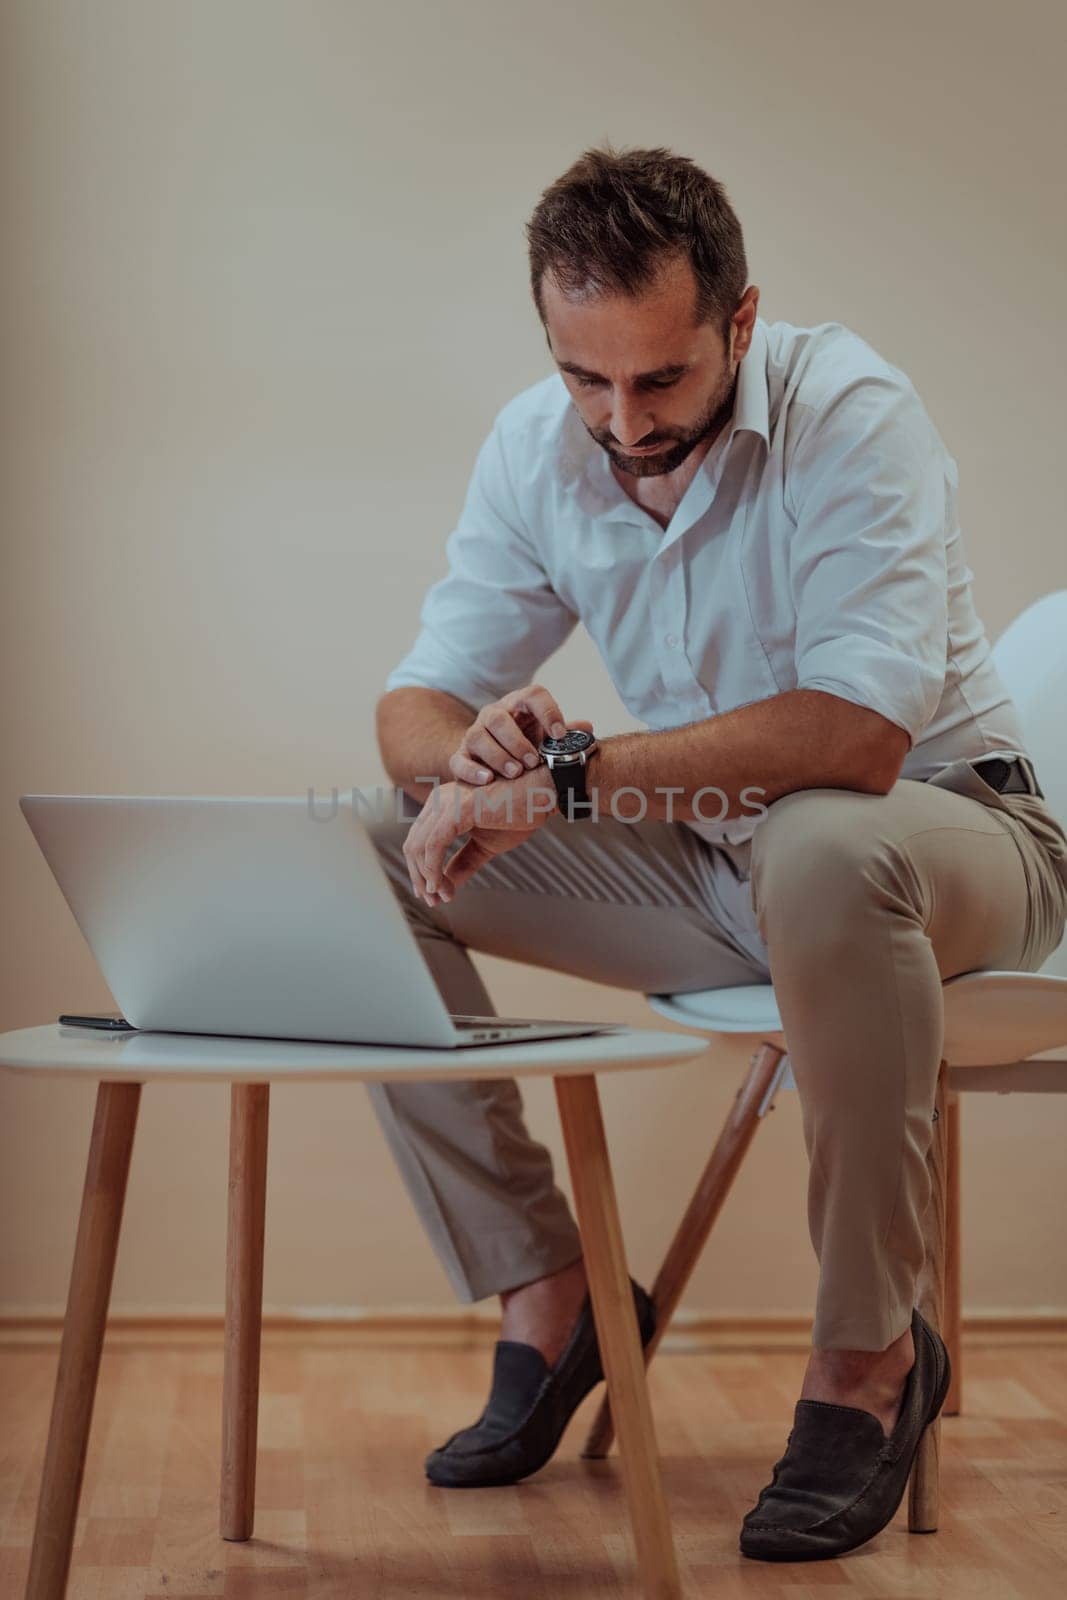 A confident businessman sitting and using laptop and smartwatch with a determined expression, while a beige background enhances the professional atmosphere, showcasing his productivity and expertise. by dotshock